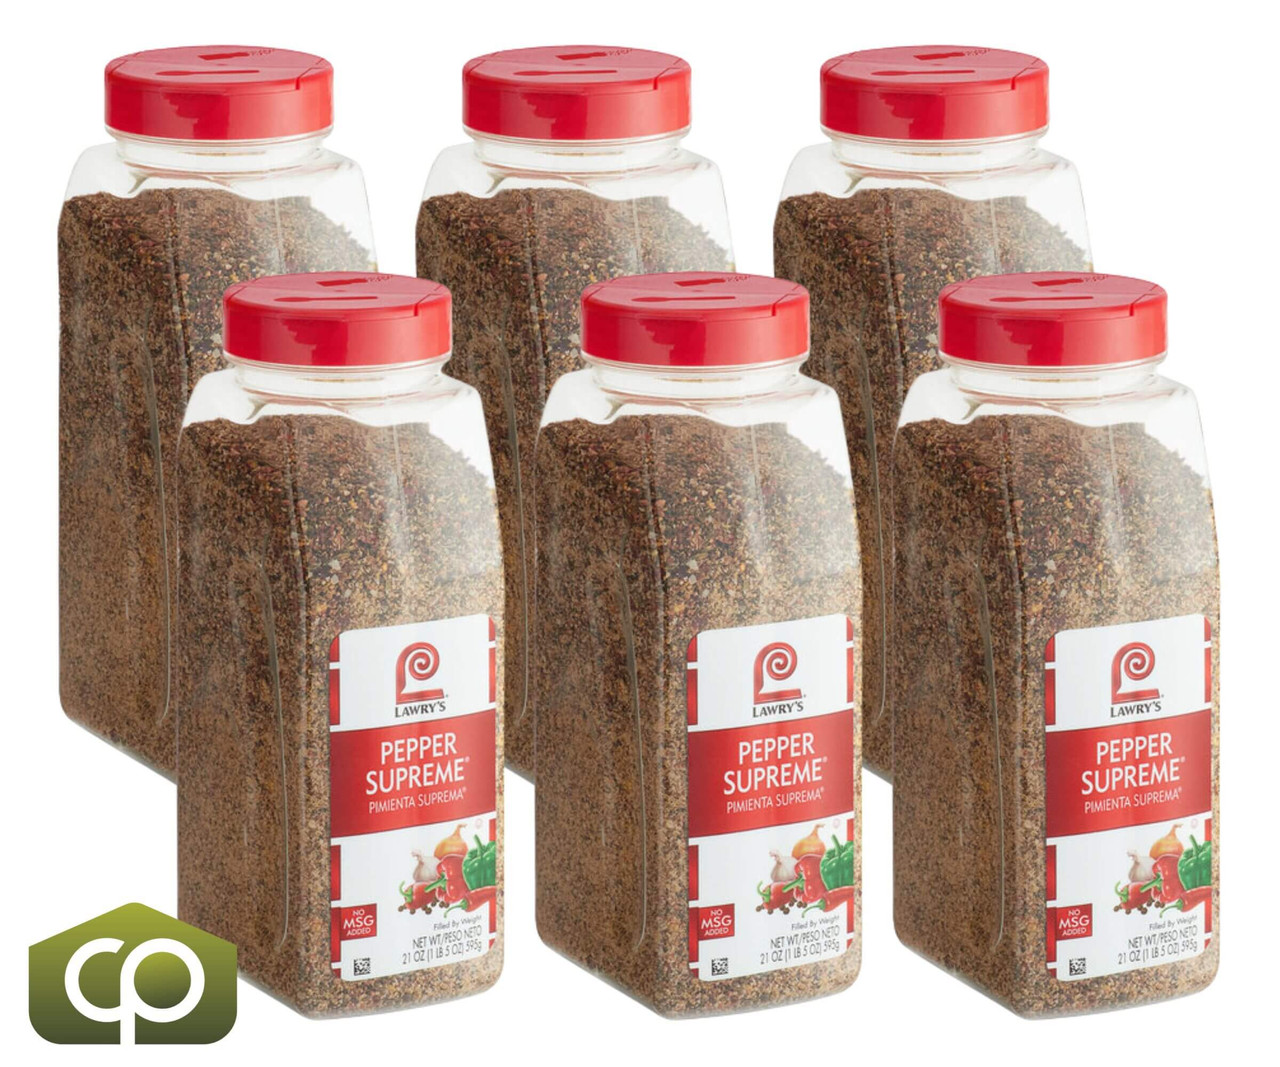 Lawry's Pepper Supreme Seasoning, 21 oz. - 6/Case - Dishes with Spicy Flavor - Chicken Pieces